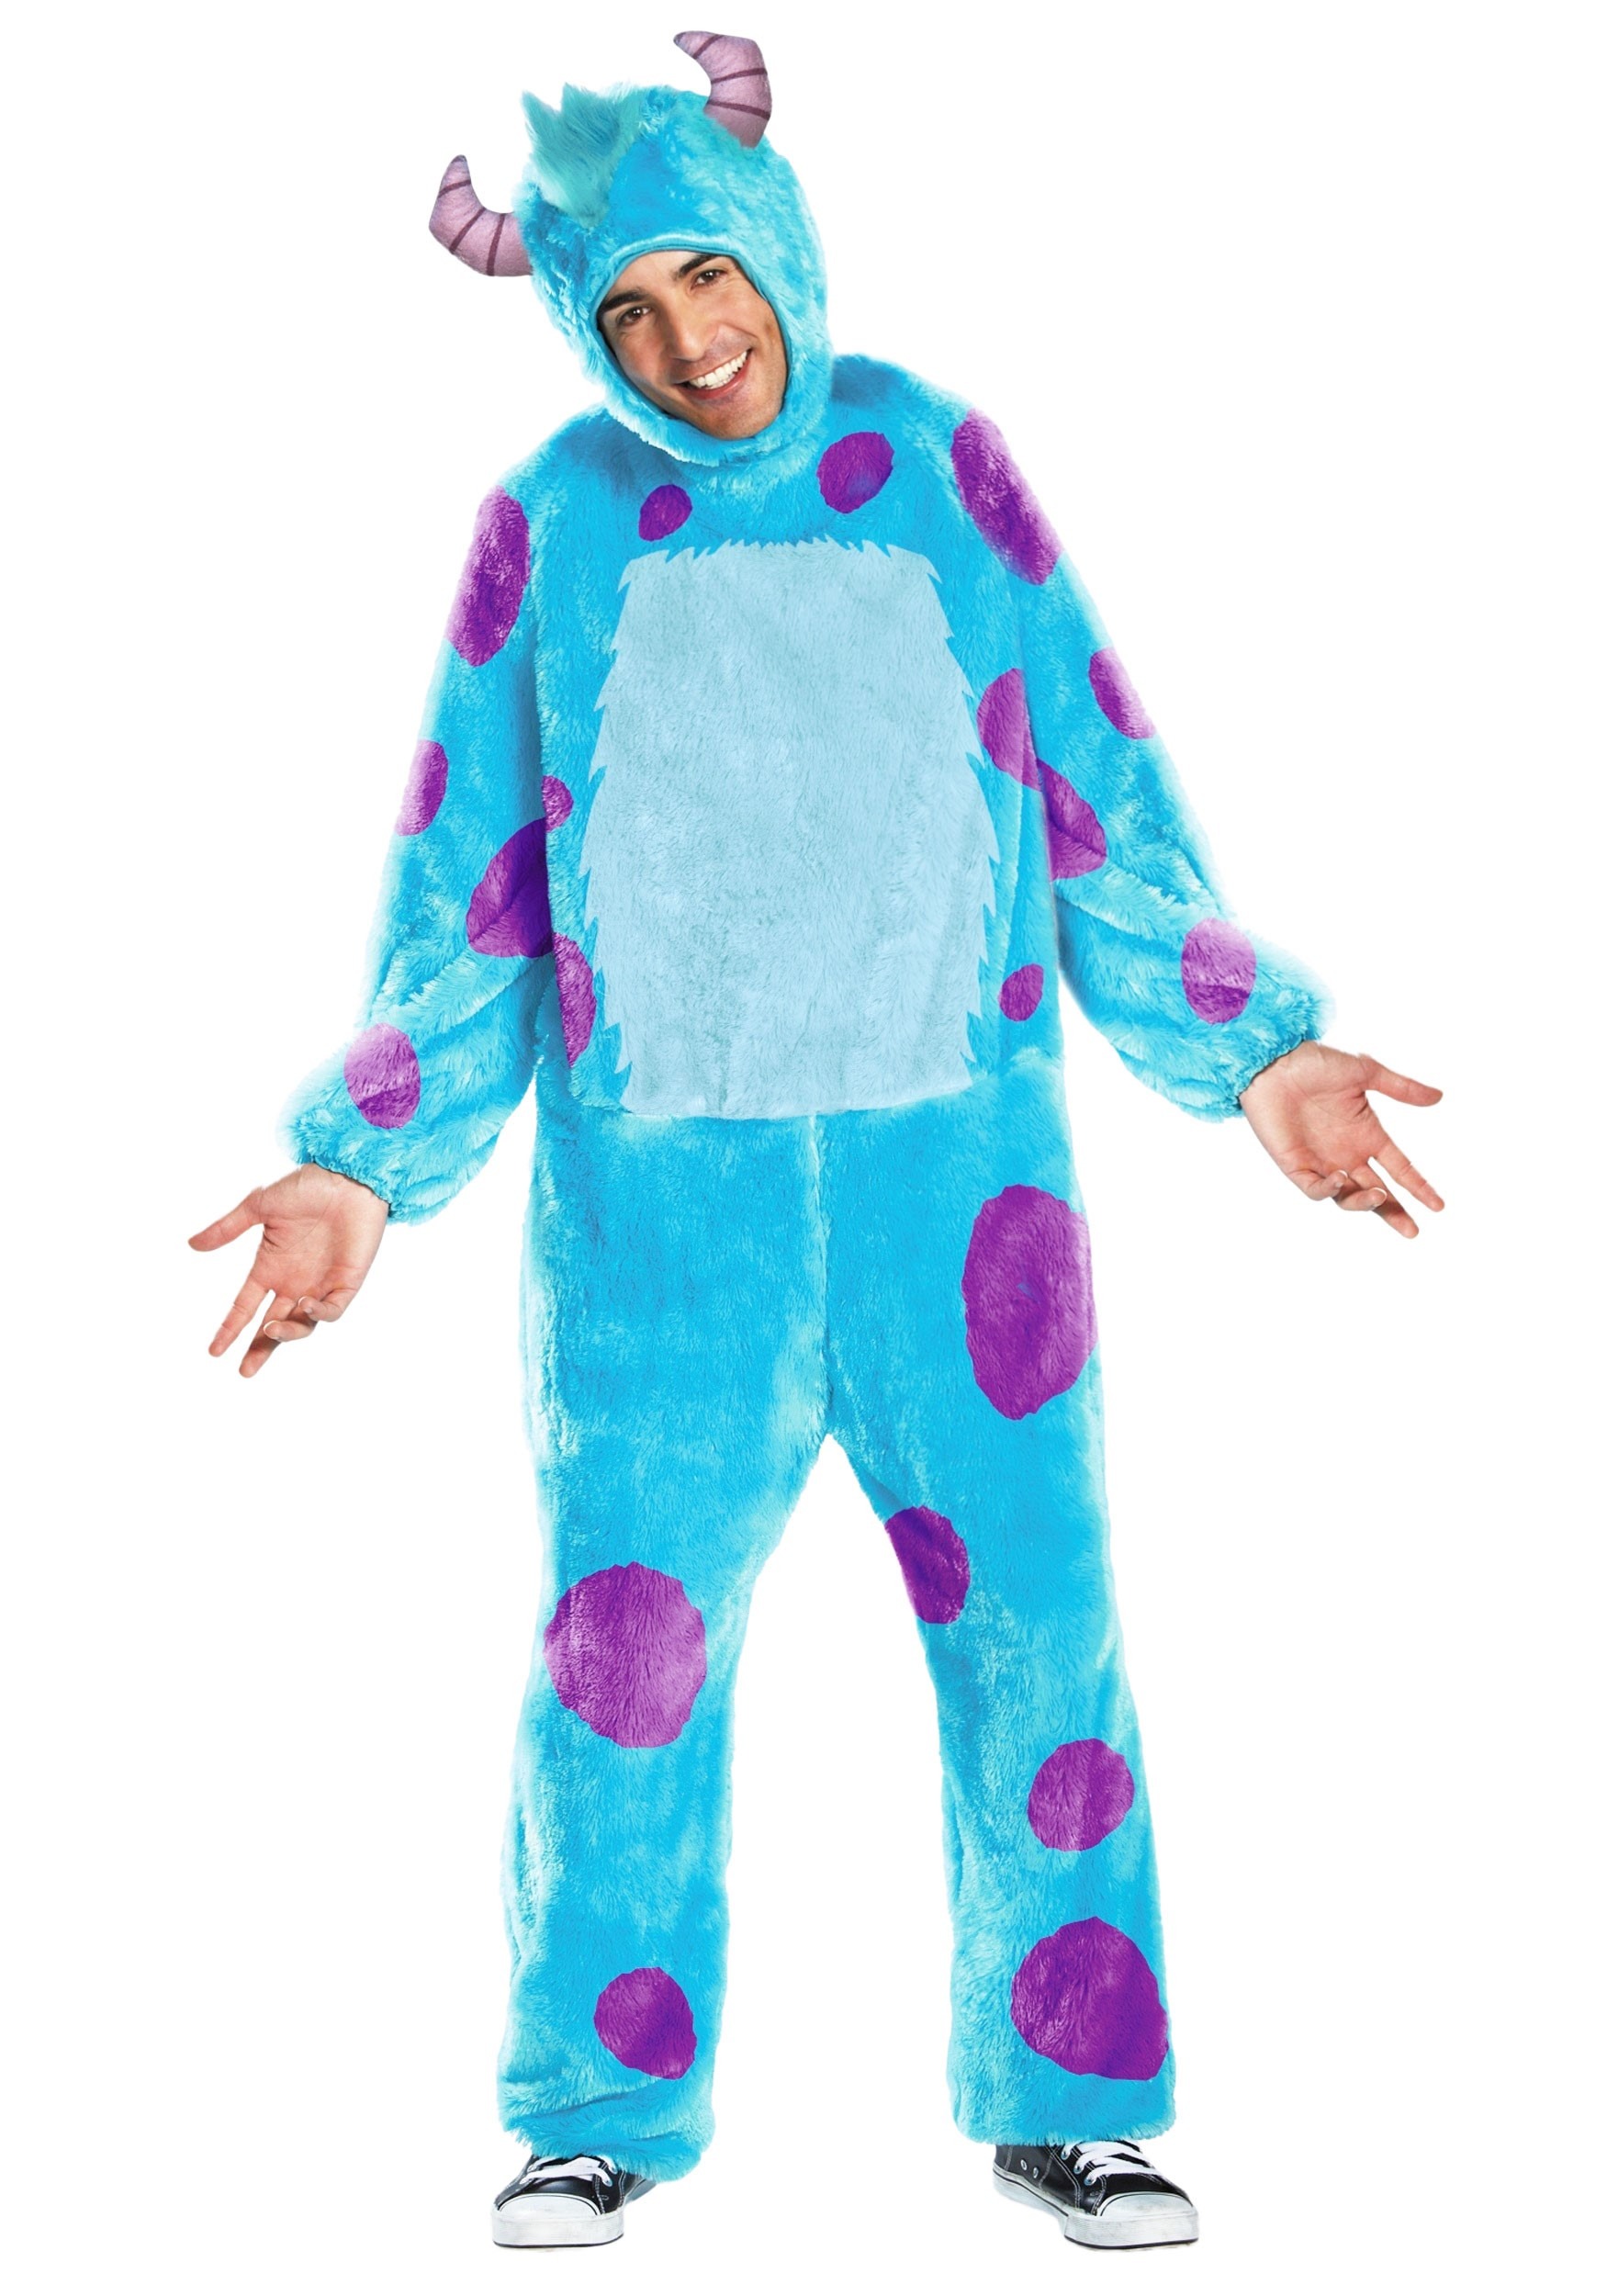 Image of Monsters Inc Sulley Costume for Adults ID DI69322-XL